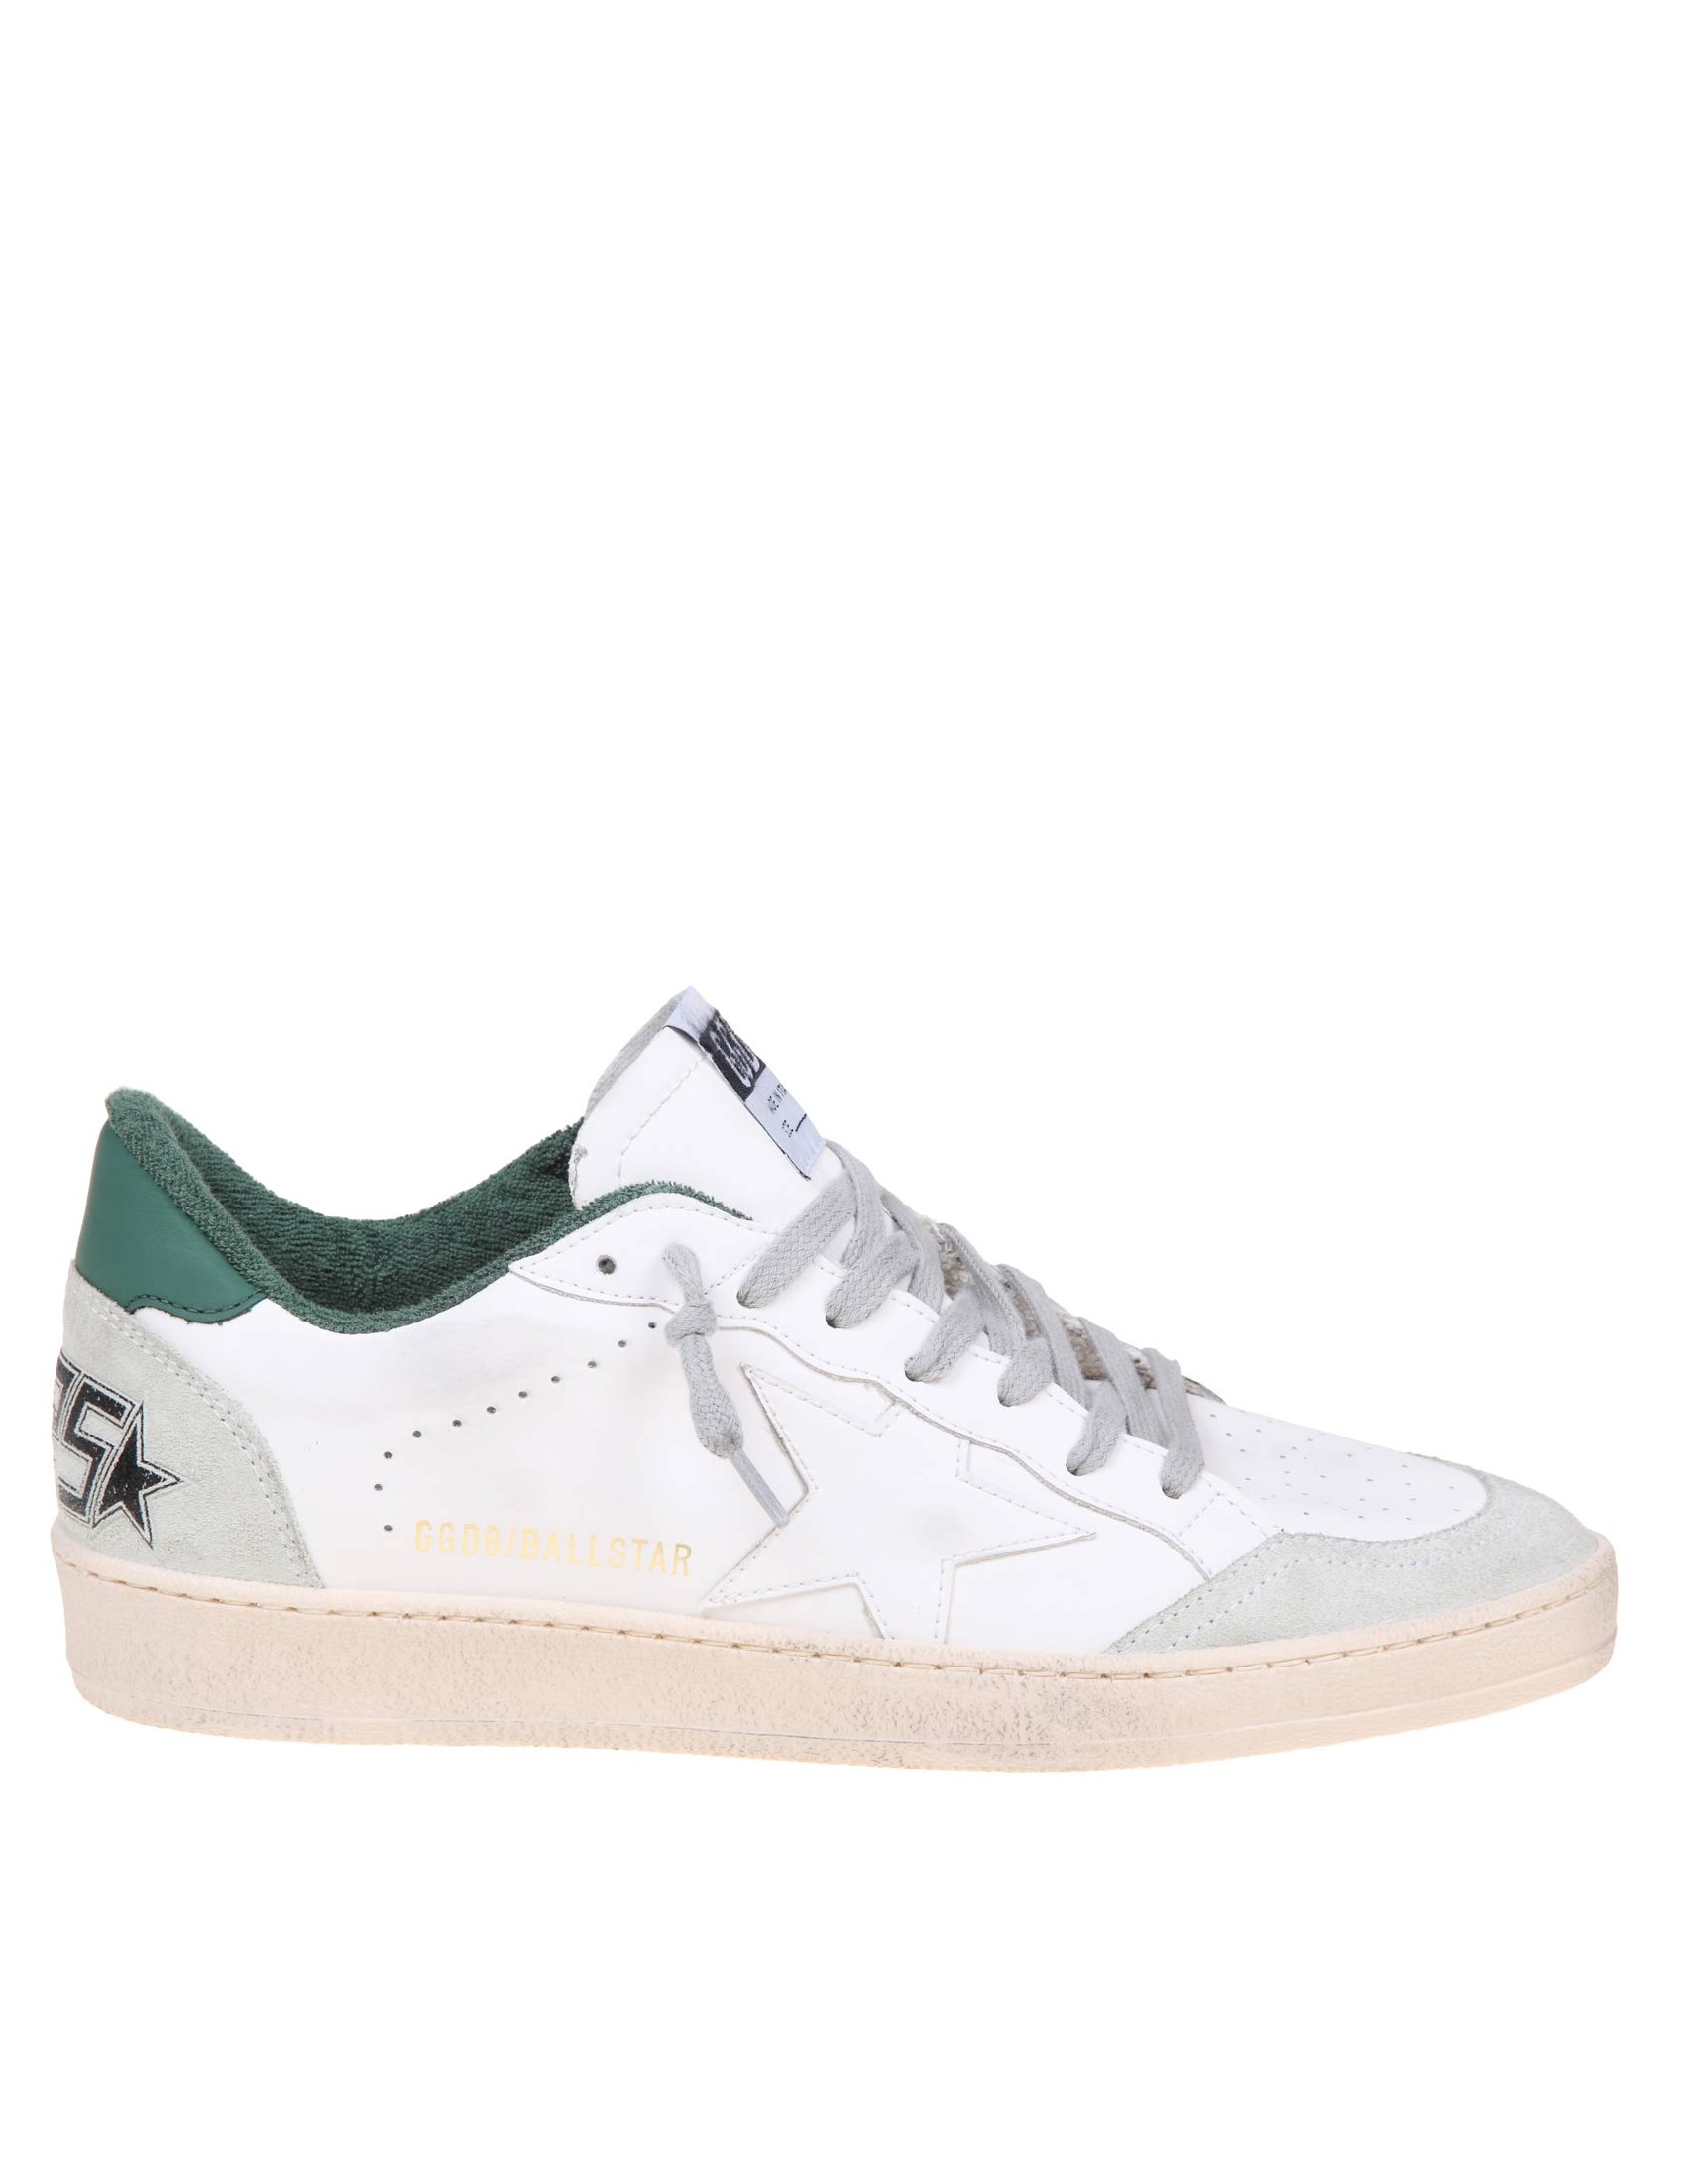 GOLDEN GOOSE BALLSTAR SNEAKERS IN WHITE AND GREEN LEATHER